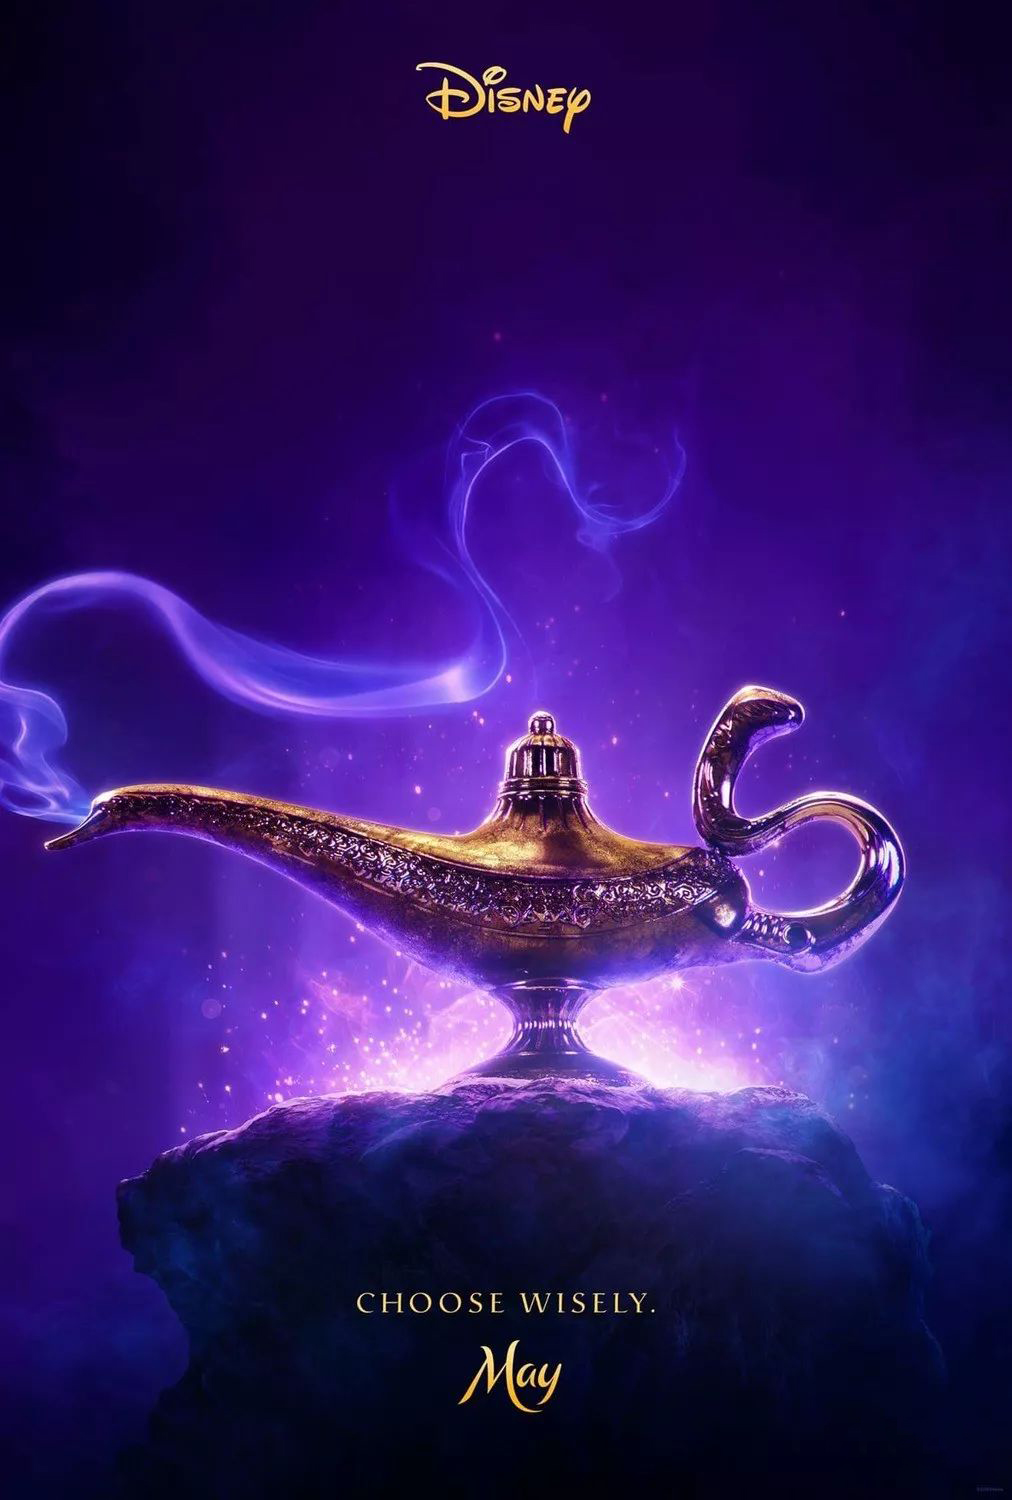 Disney Joint Hot VR Game Aladdin released - News - 1